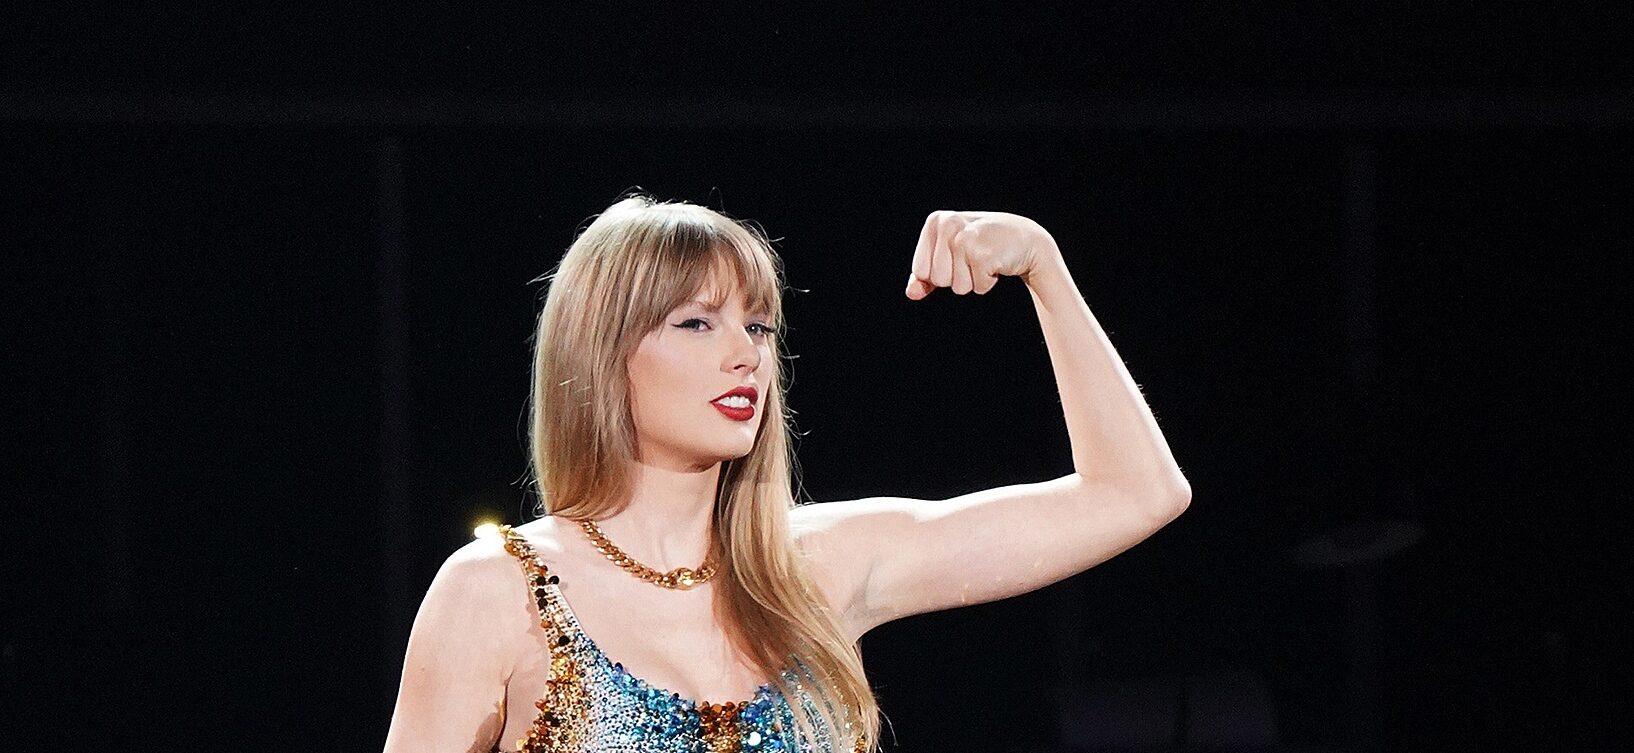 Taylor Swift shows off her muscles while performing